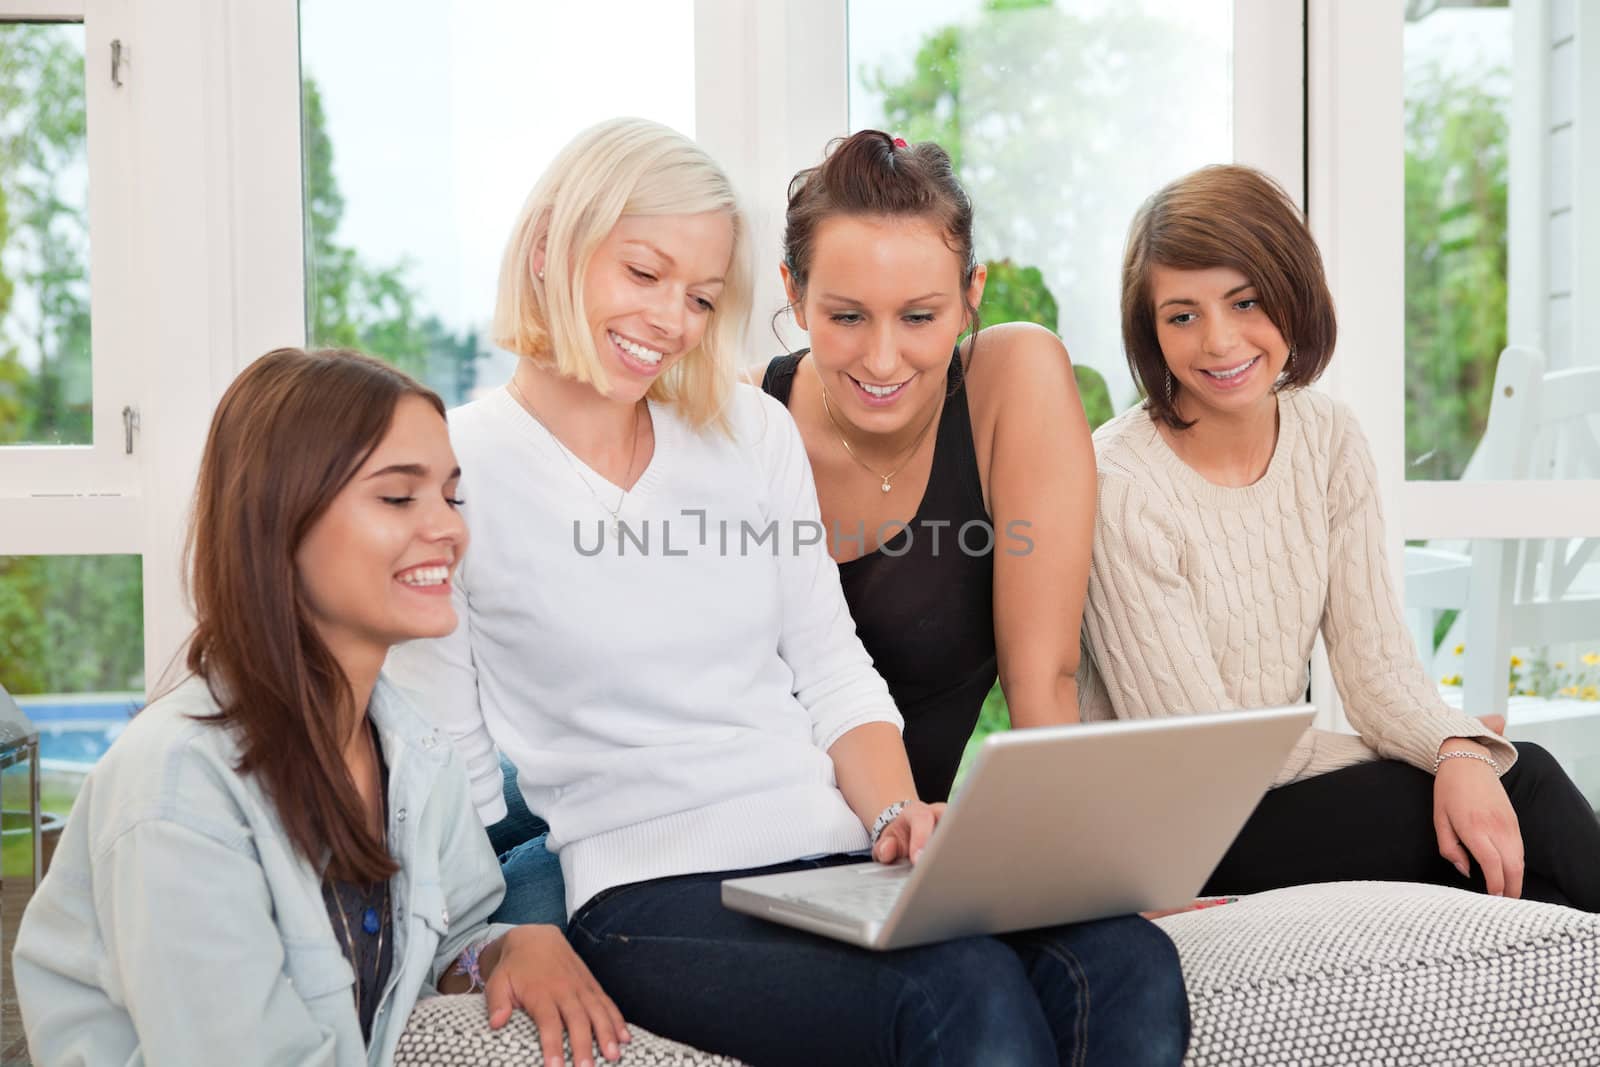 Group of smiling female friends sitting on couch and looking at laptop